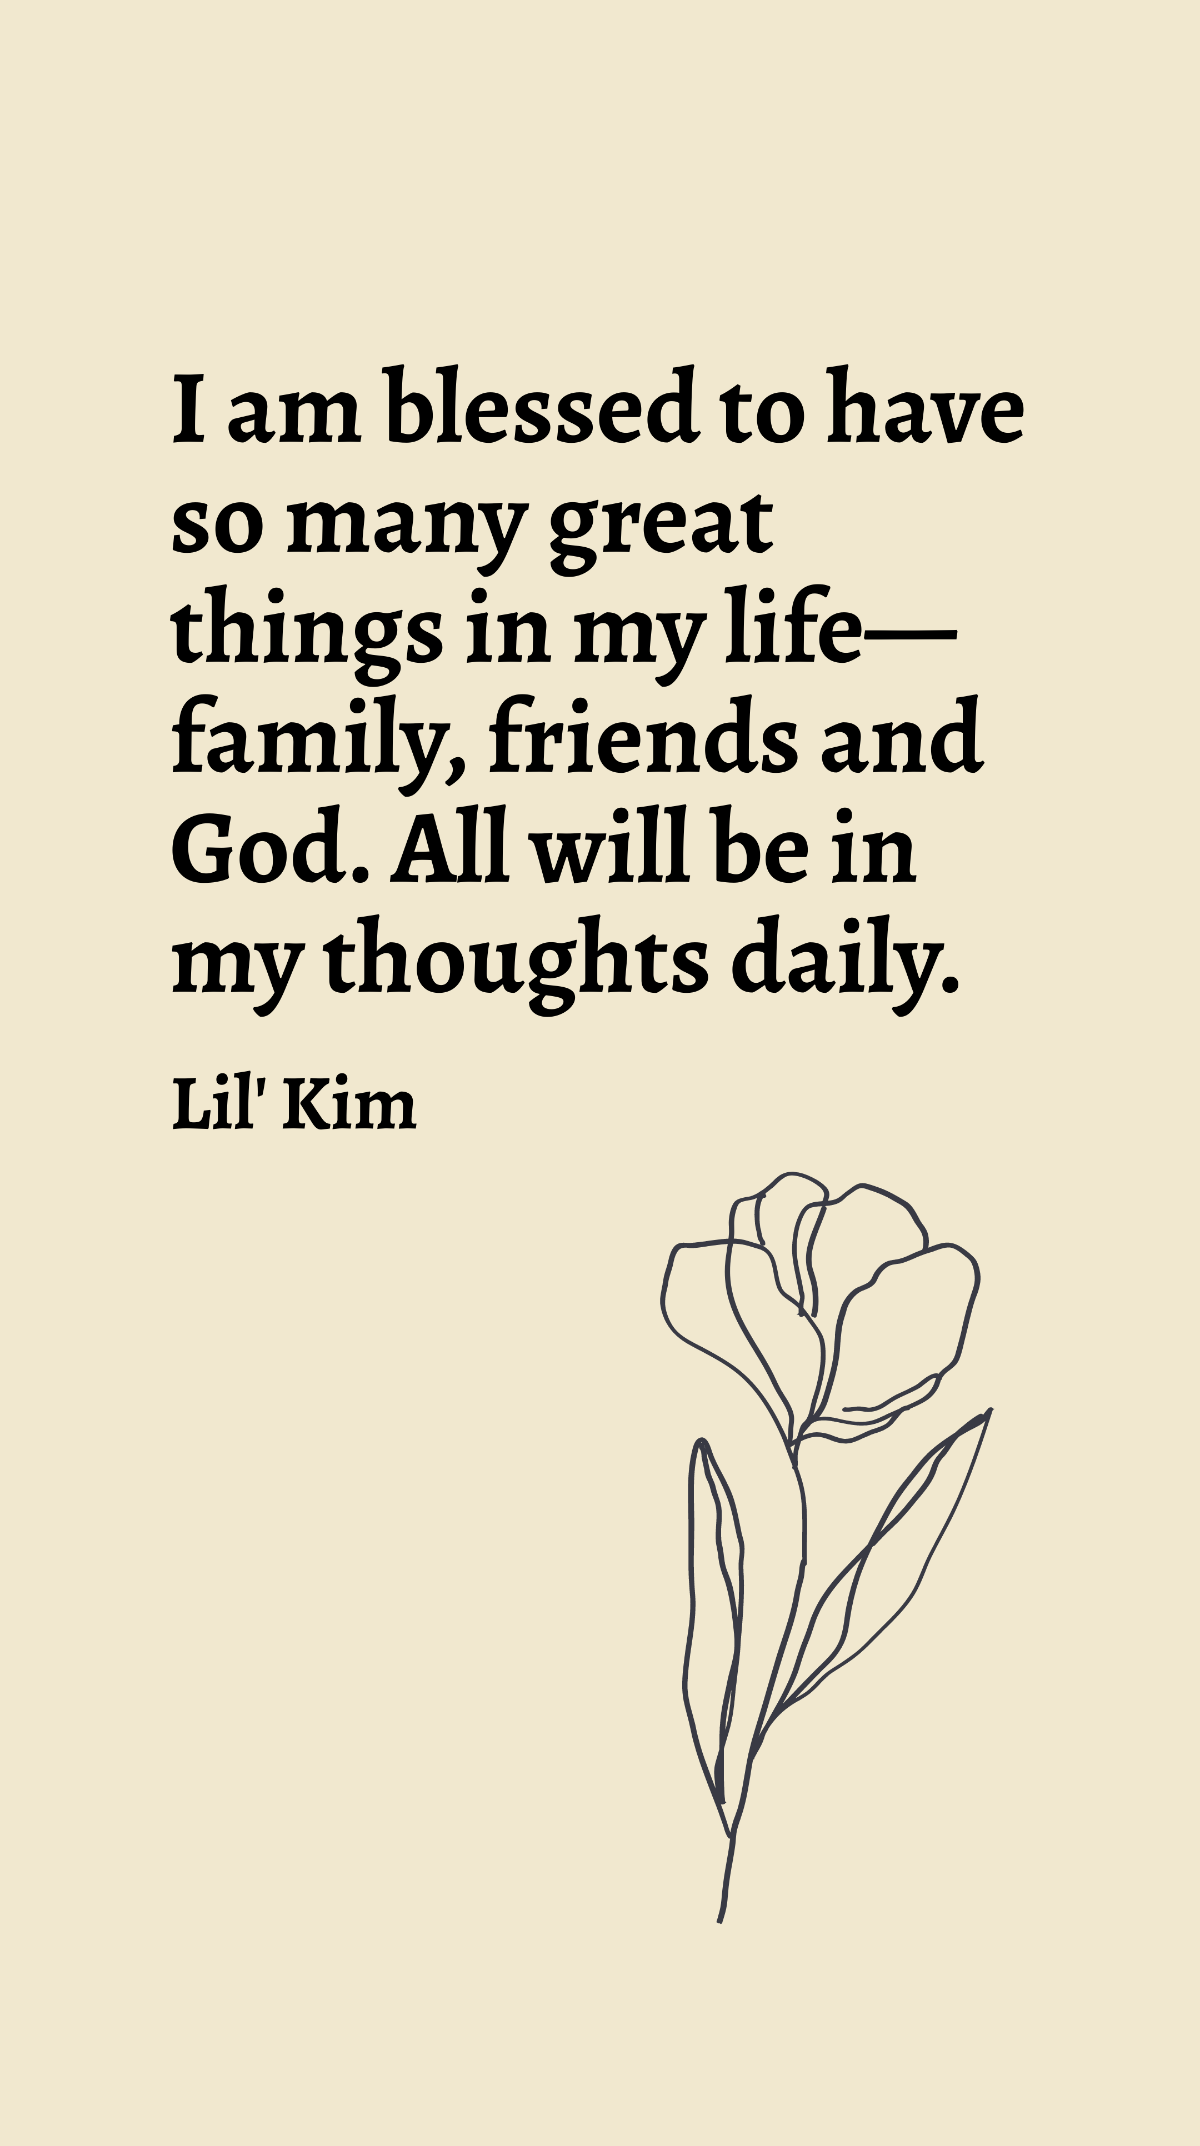 Lil' Kim - I am blessed to have so many great things in my life - family, friends and God. All will be in my thoughts daily.